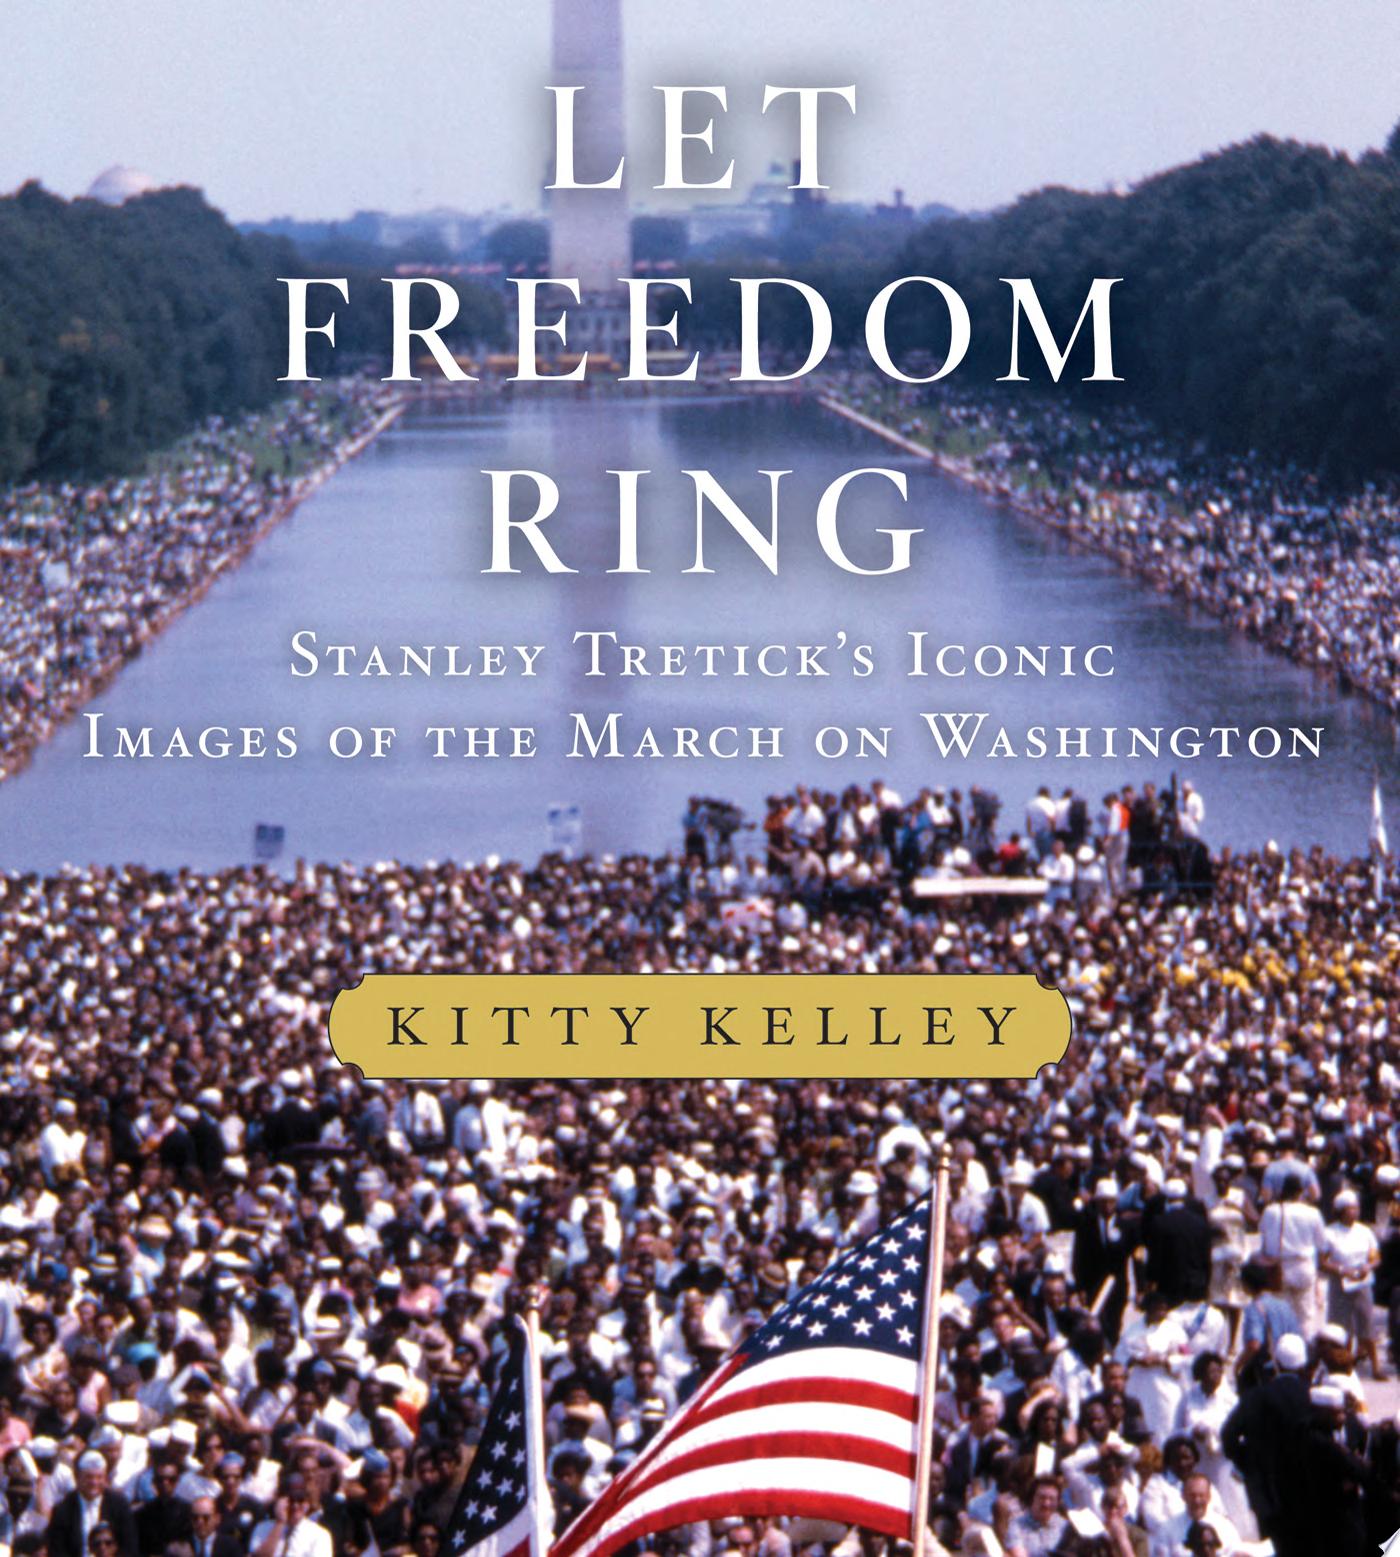 Image for "Let Freedom Ring"